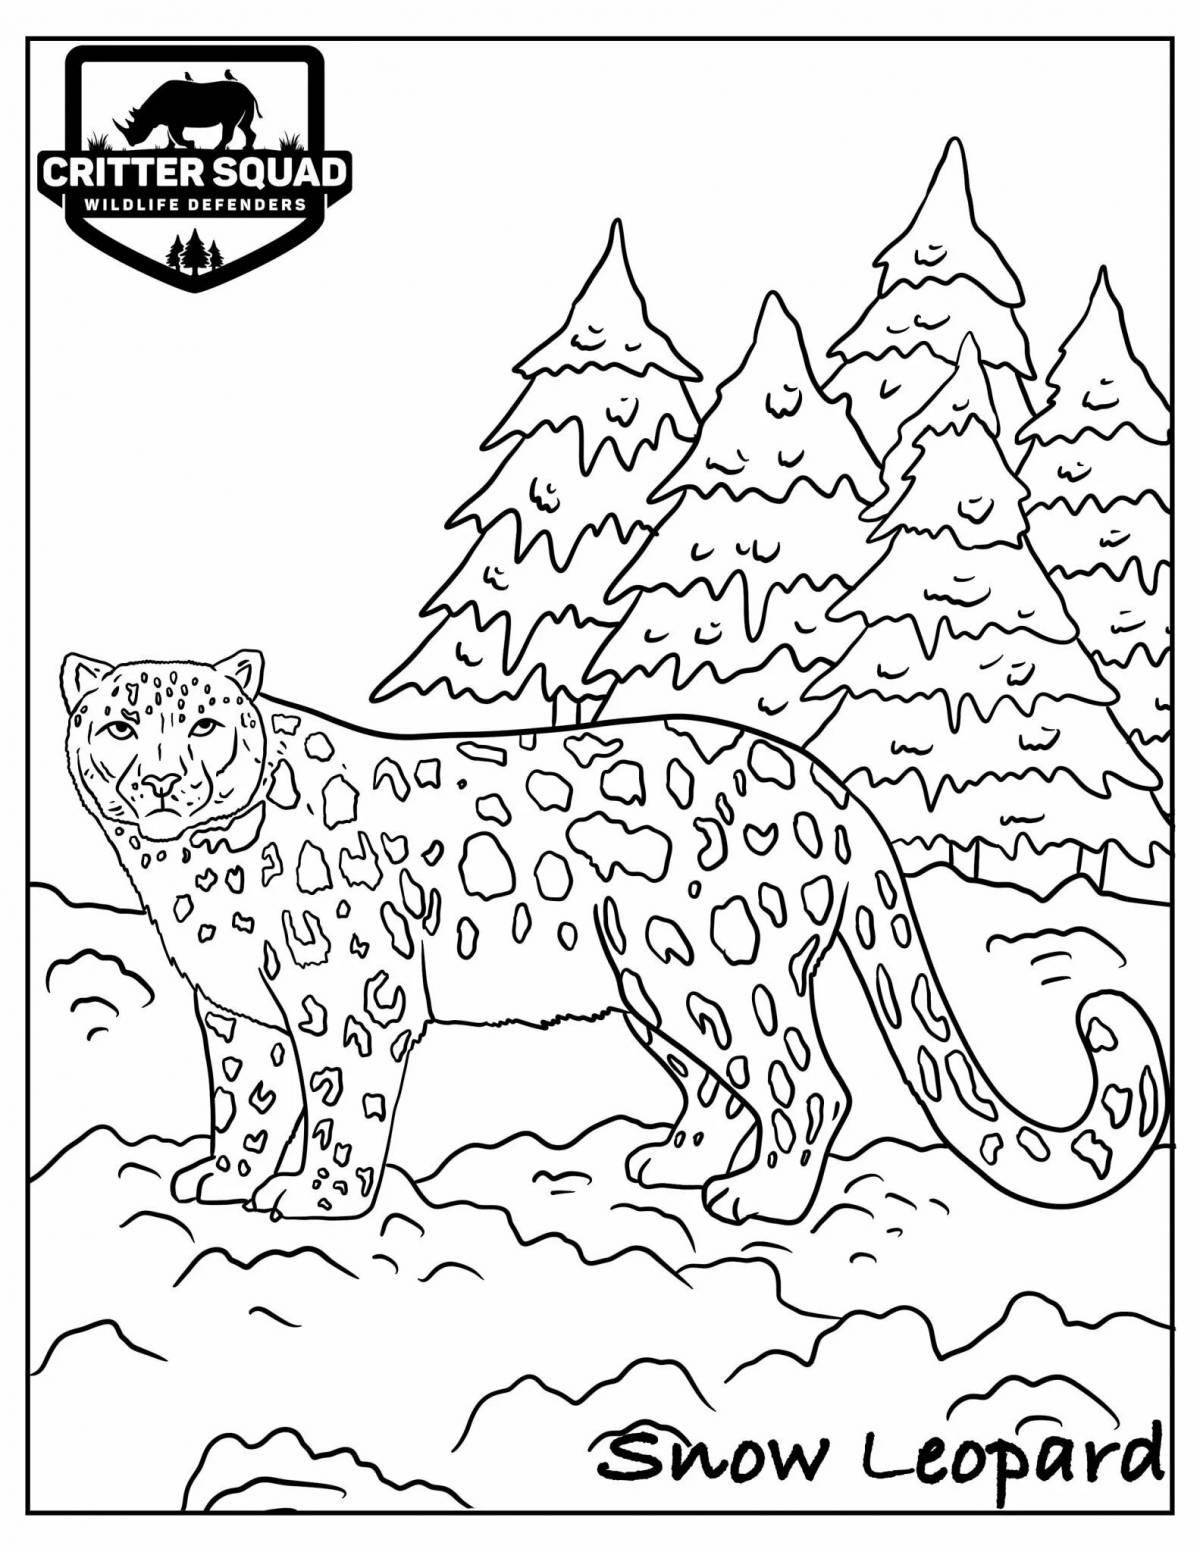 Snow leopard coloring page